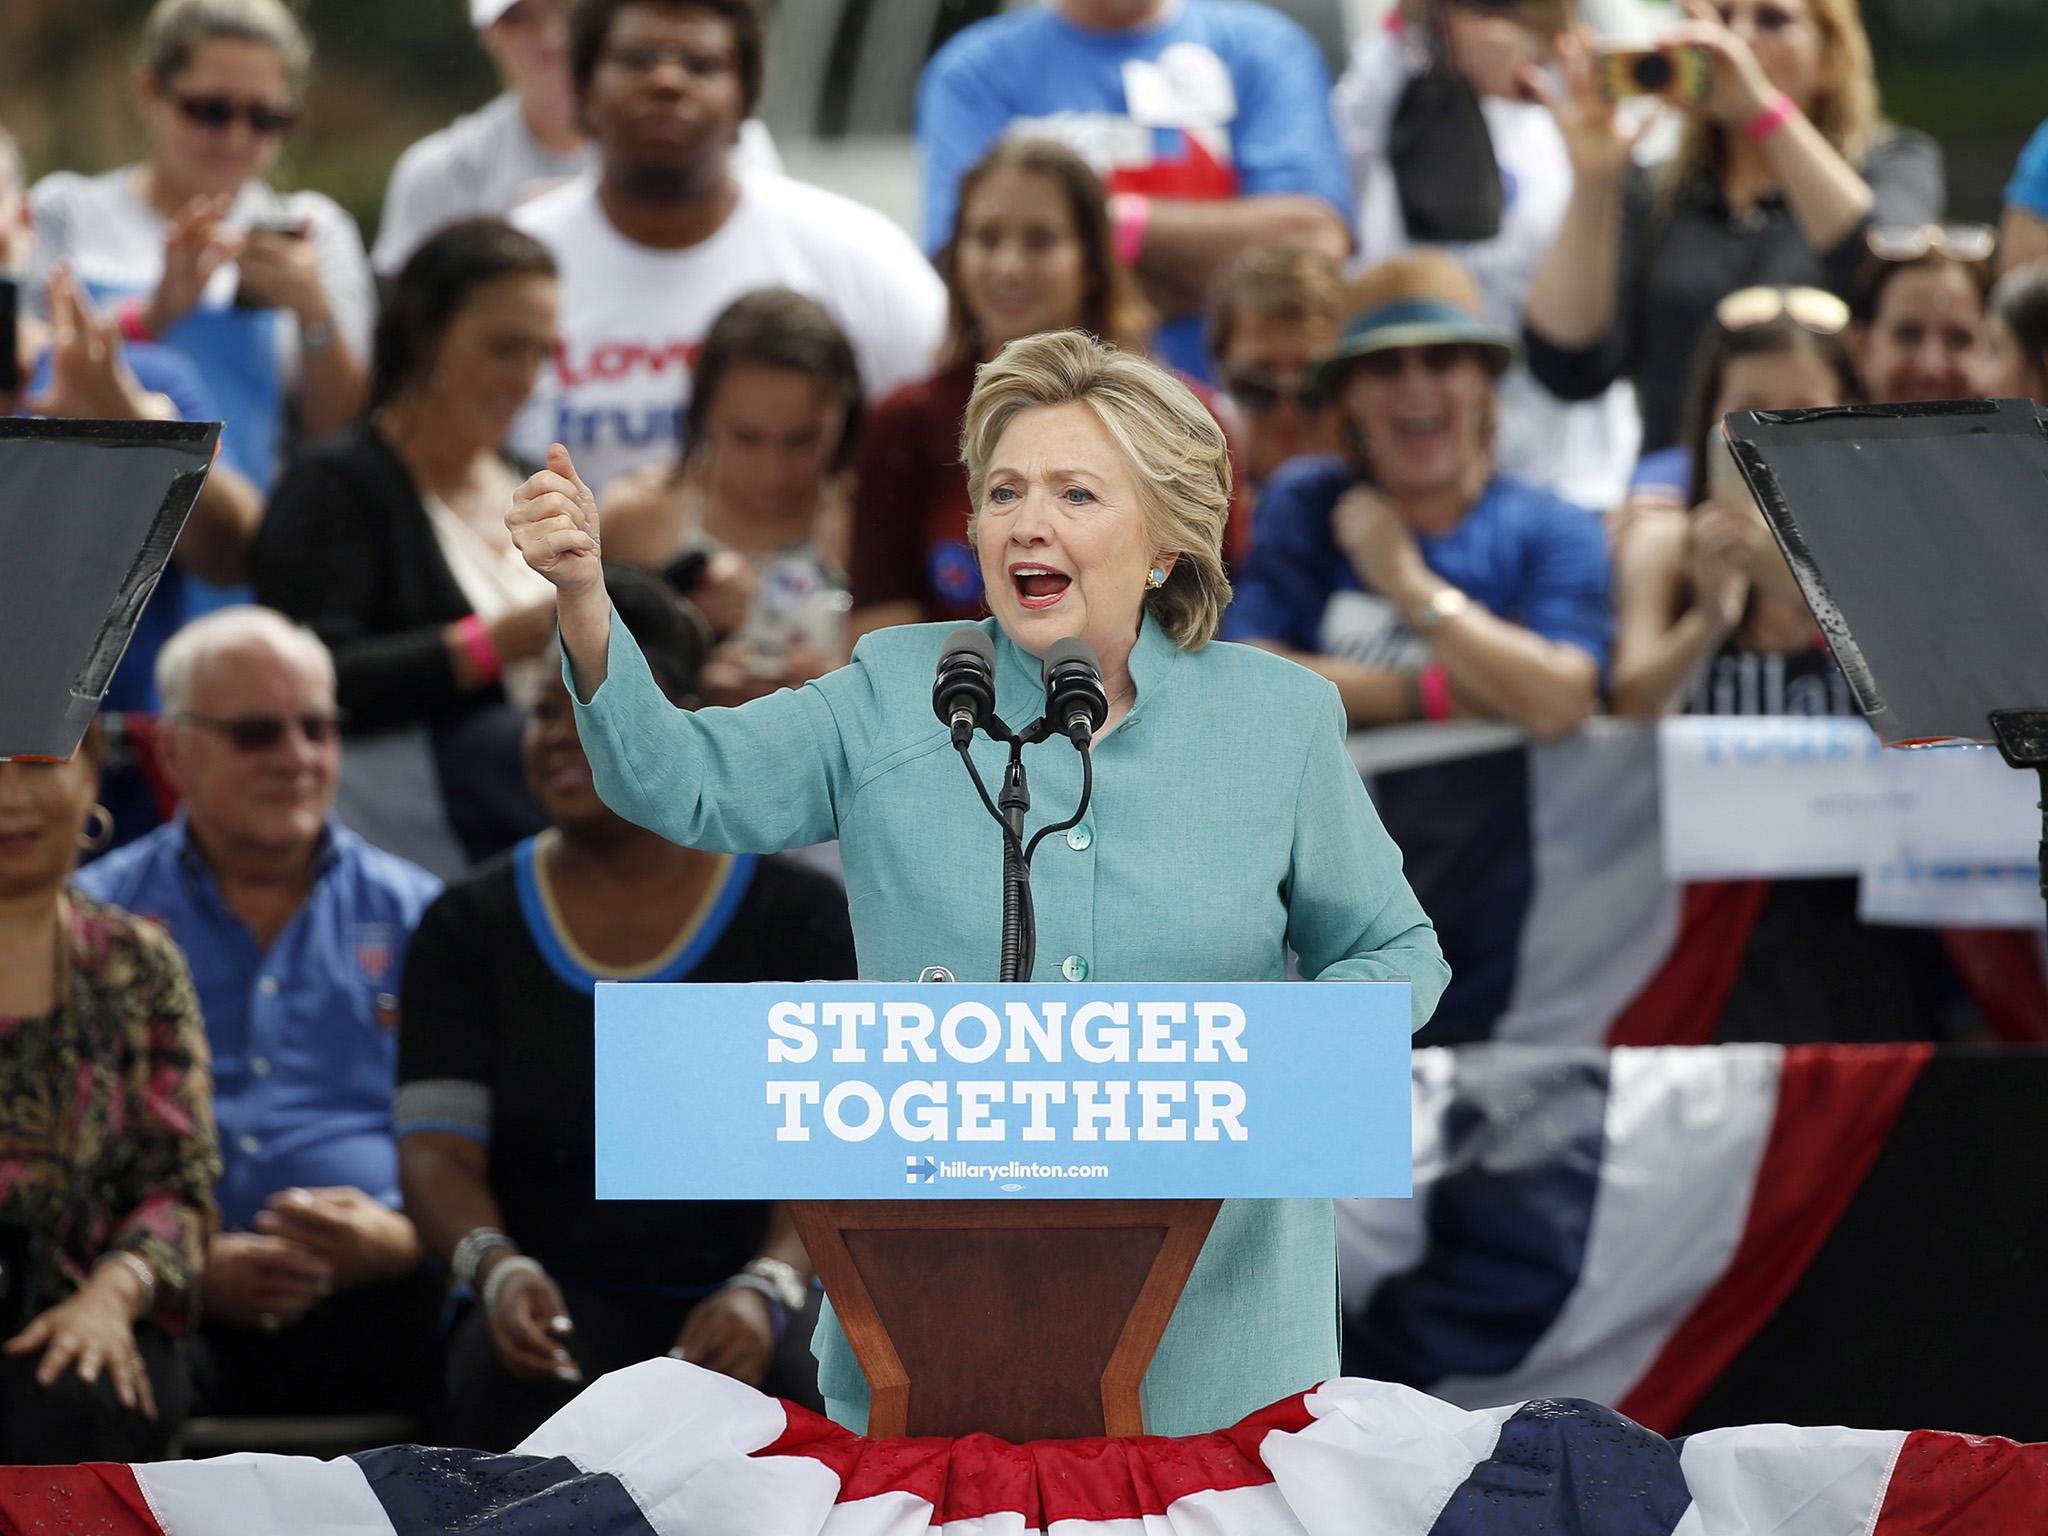 Hillary Clinton speaks at a rally in Pembroke Pines, Florida